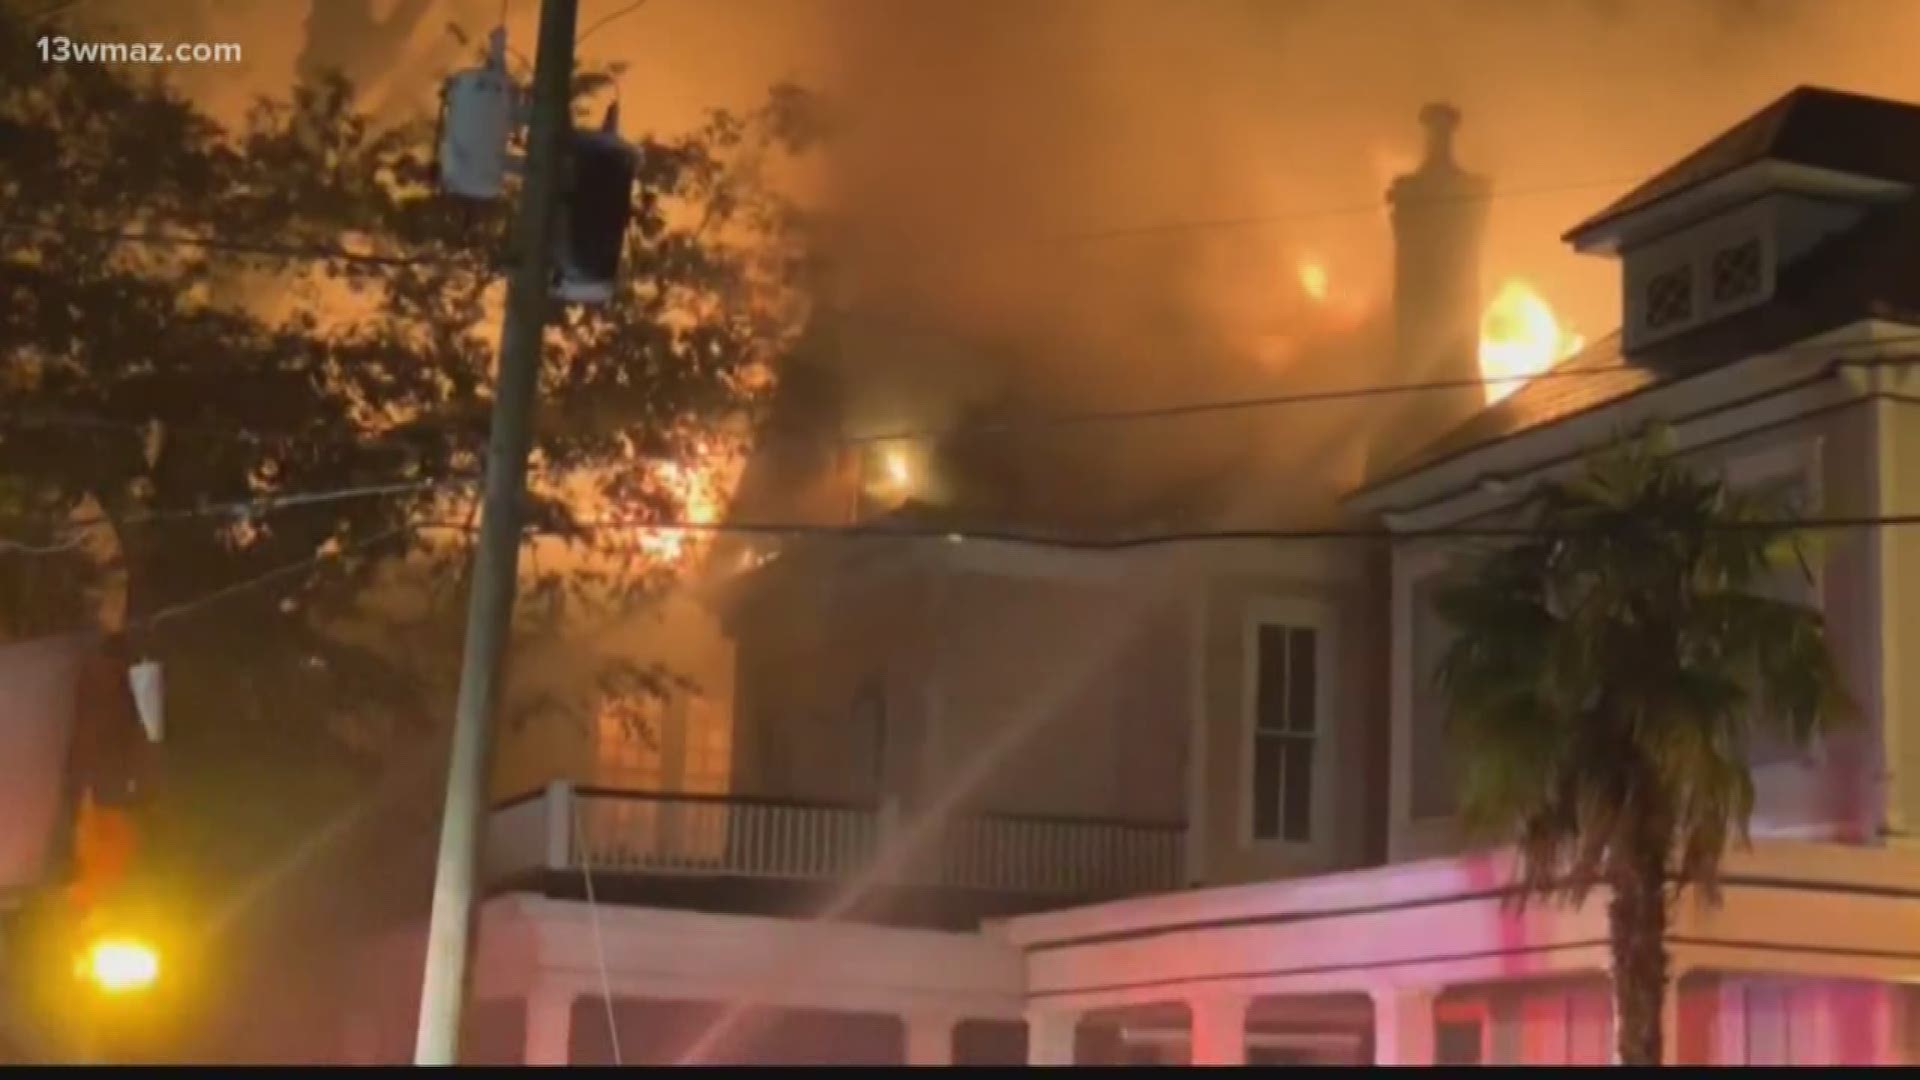 Flames ripped through three historic homes in downtown Macon Wednesday night on Orange and High Streets. 5 firefighters were injured in the blaze, and crews have been working all night and into the day trying to figure out what sparked this massive fire.